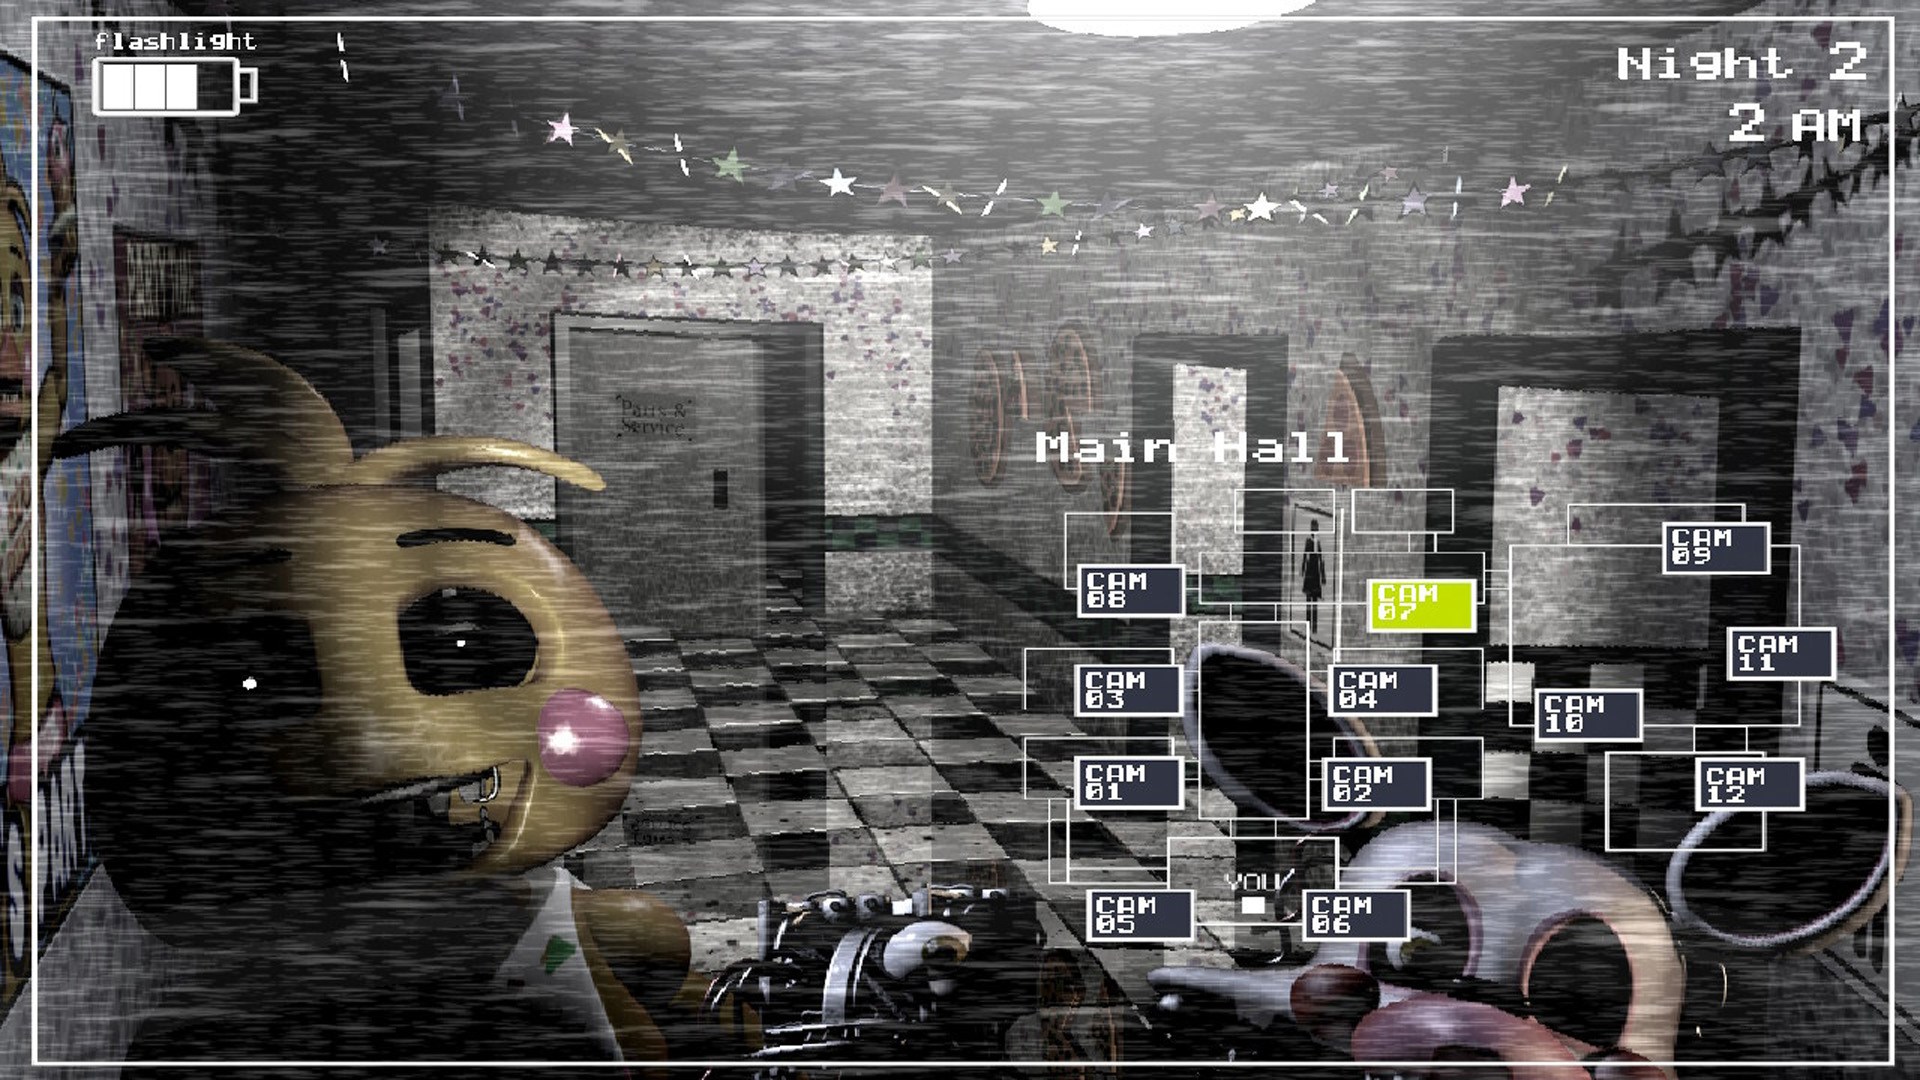 Buy Five Nights at Freddy's 3 Xbox key! Cheap price